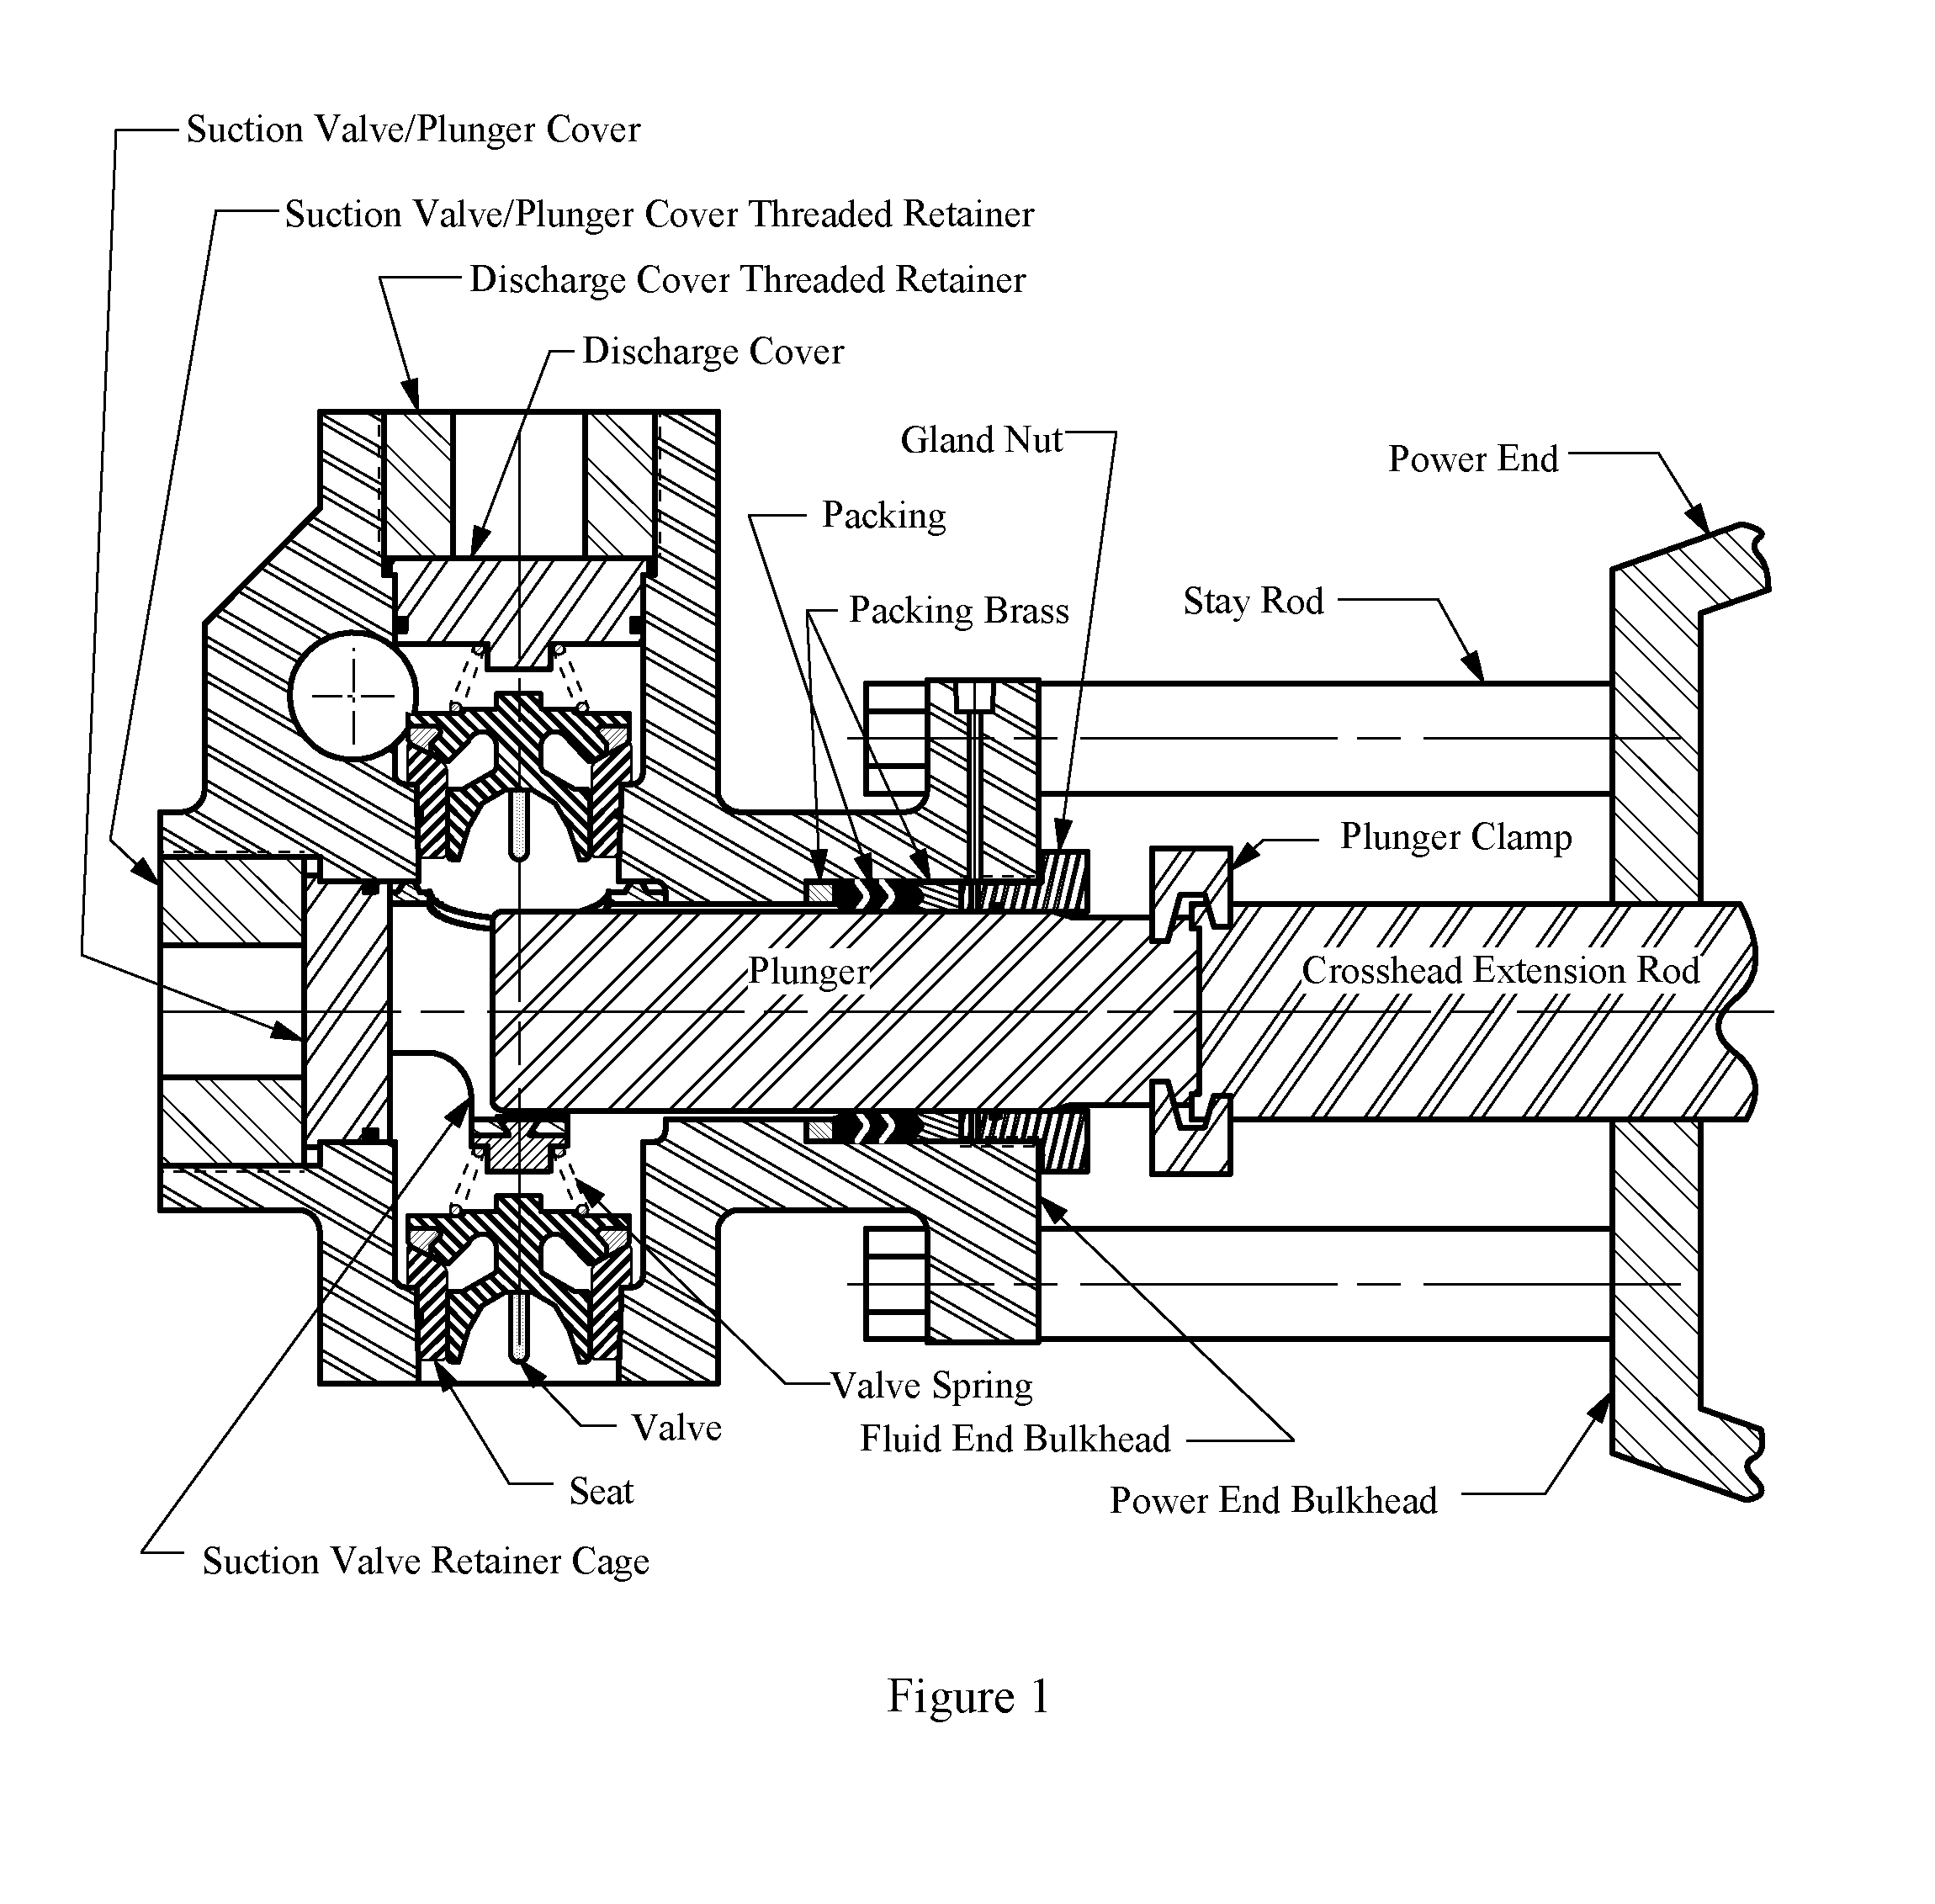 Fluid End with Carbide Valve Seat and Adhesive Dampening Interface